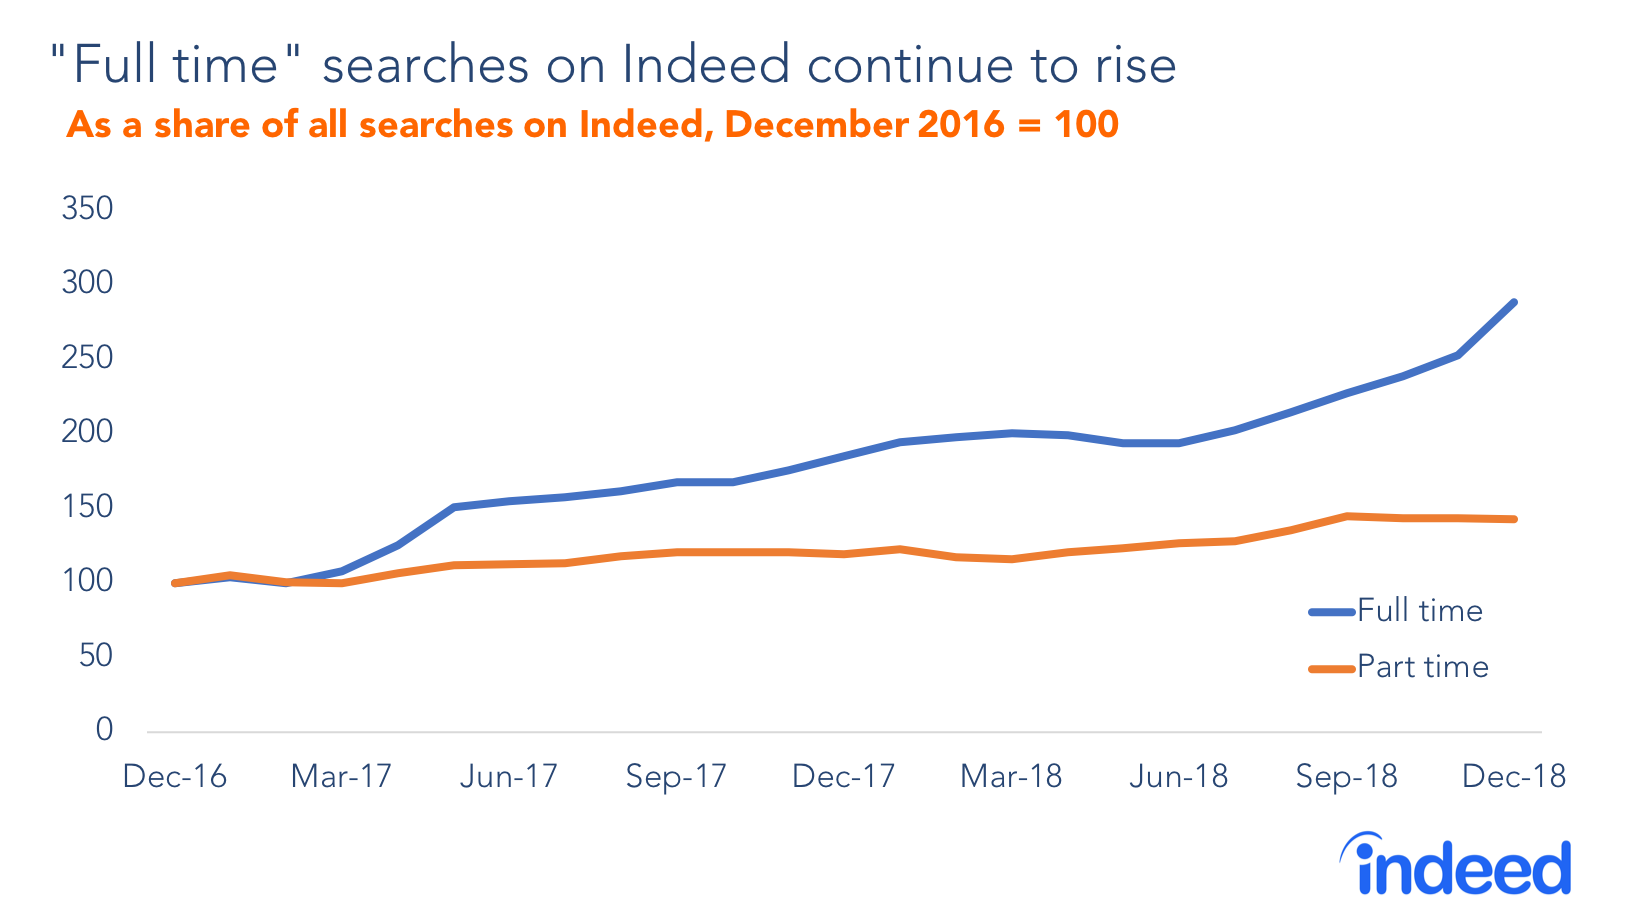 Full time searches on Indeed continue to rise